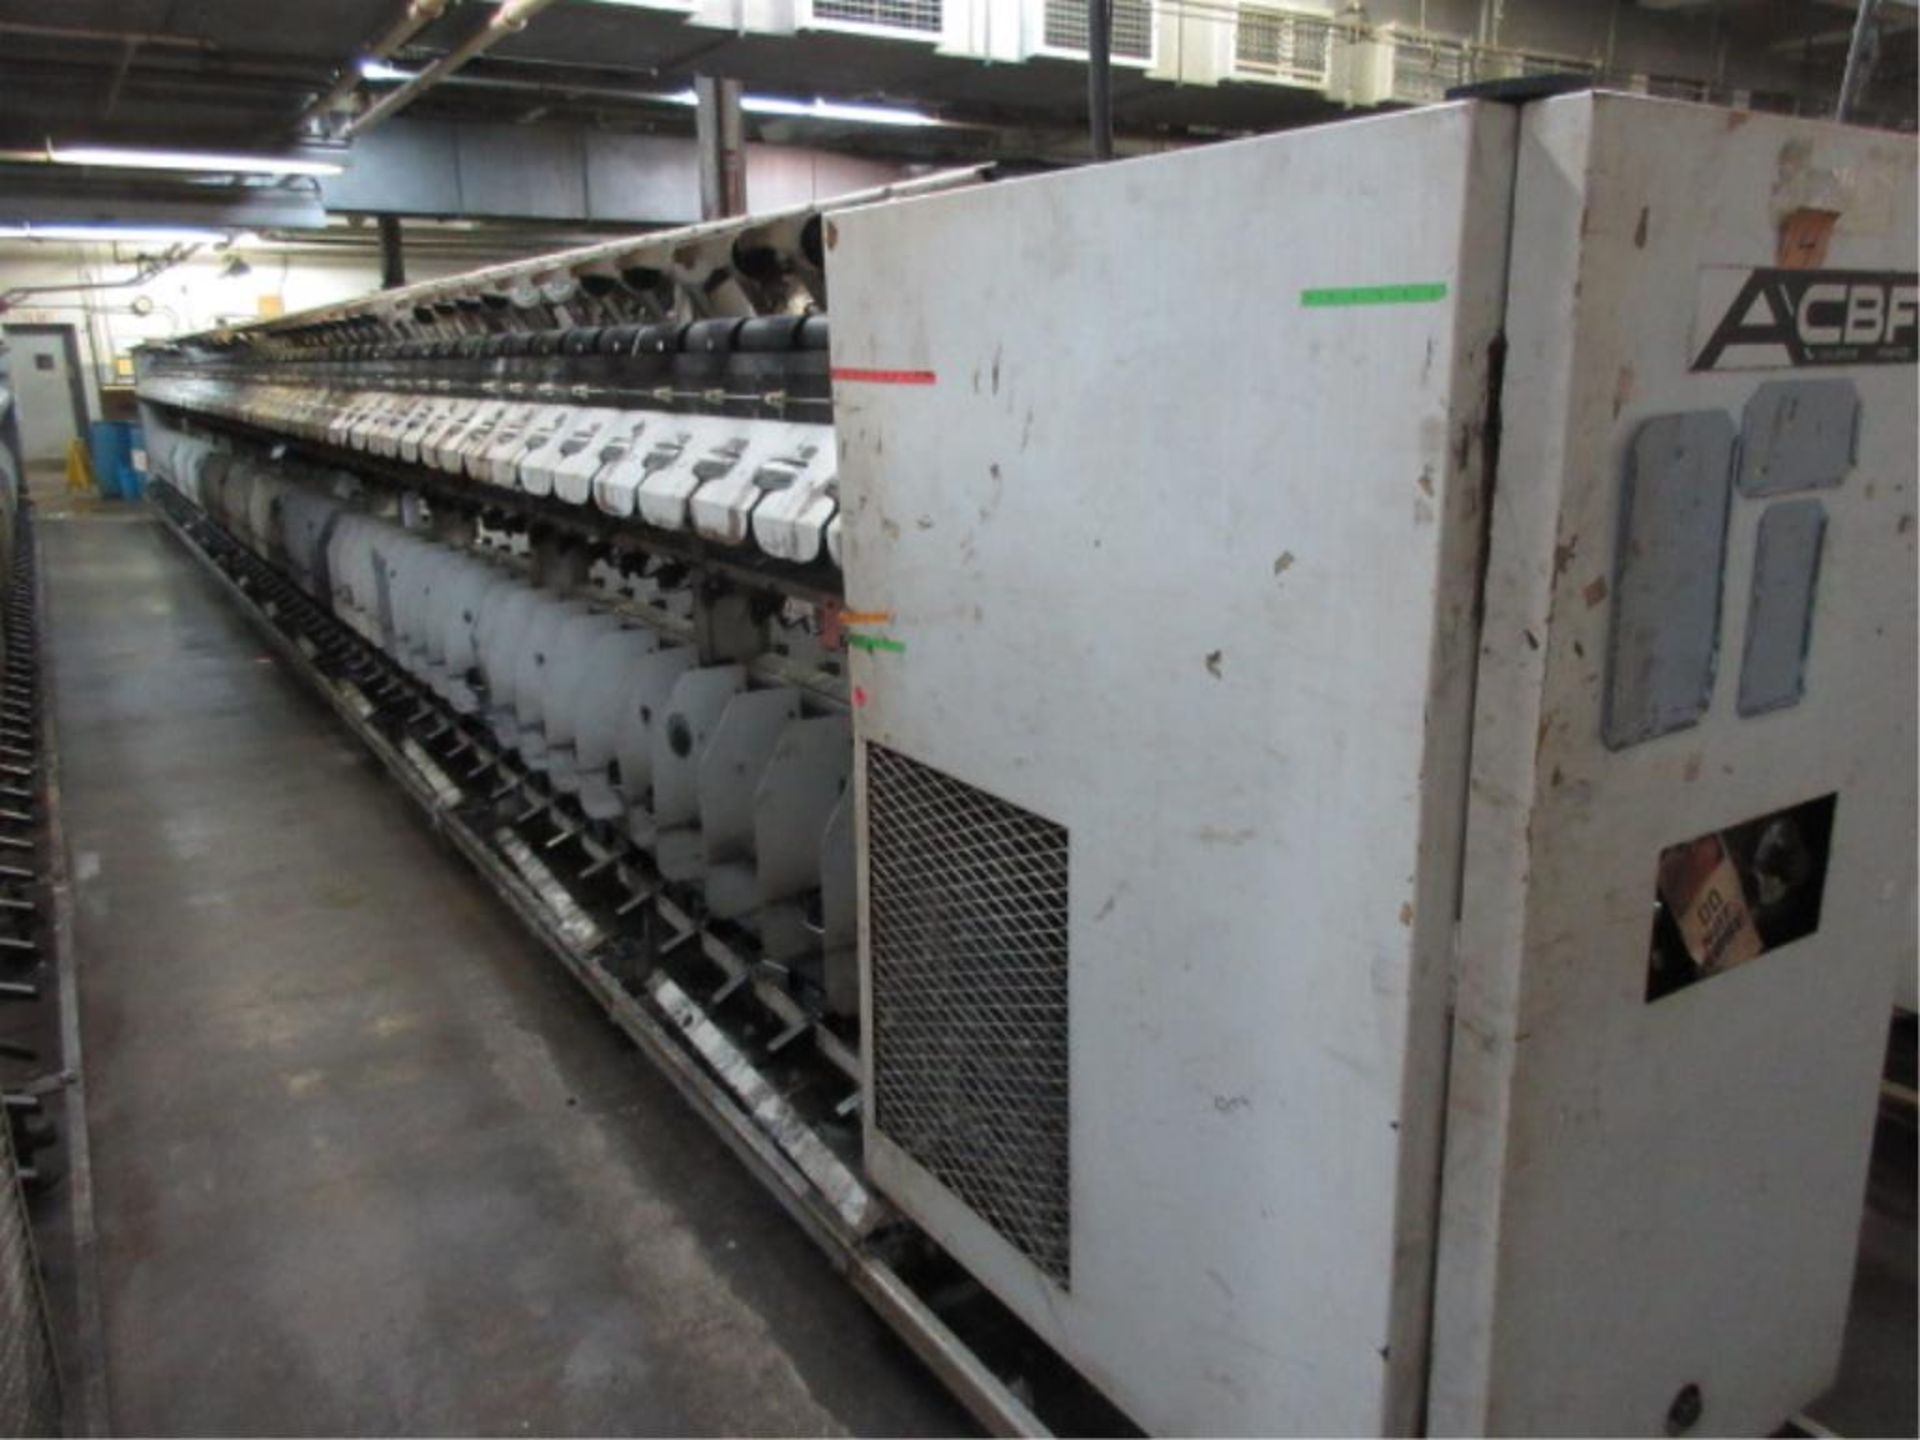 ACBF 3055 BI 2X1 Twisting Machine, (1983), 120 spindles, needs belts & gears, please inspect. SN# - Image 2 of 8